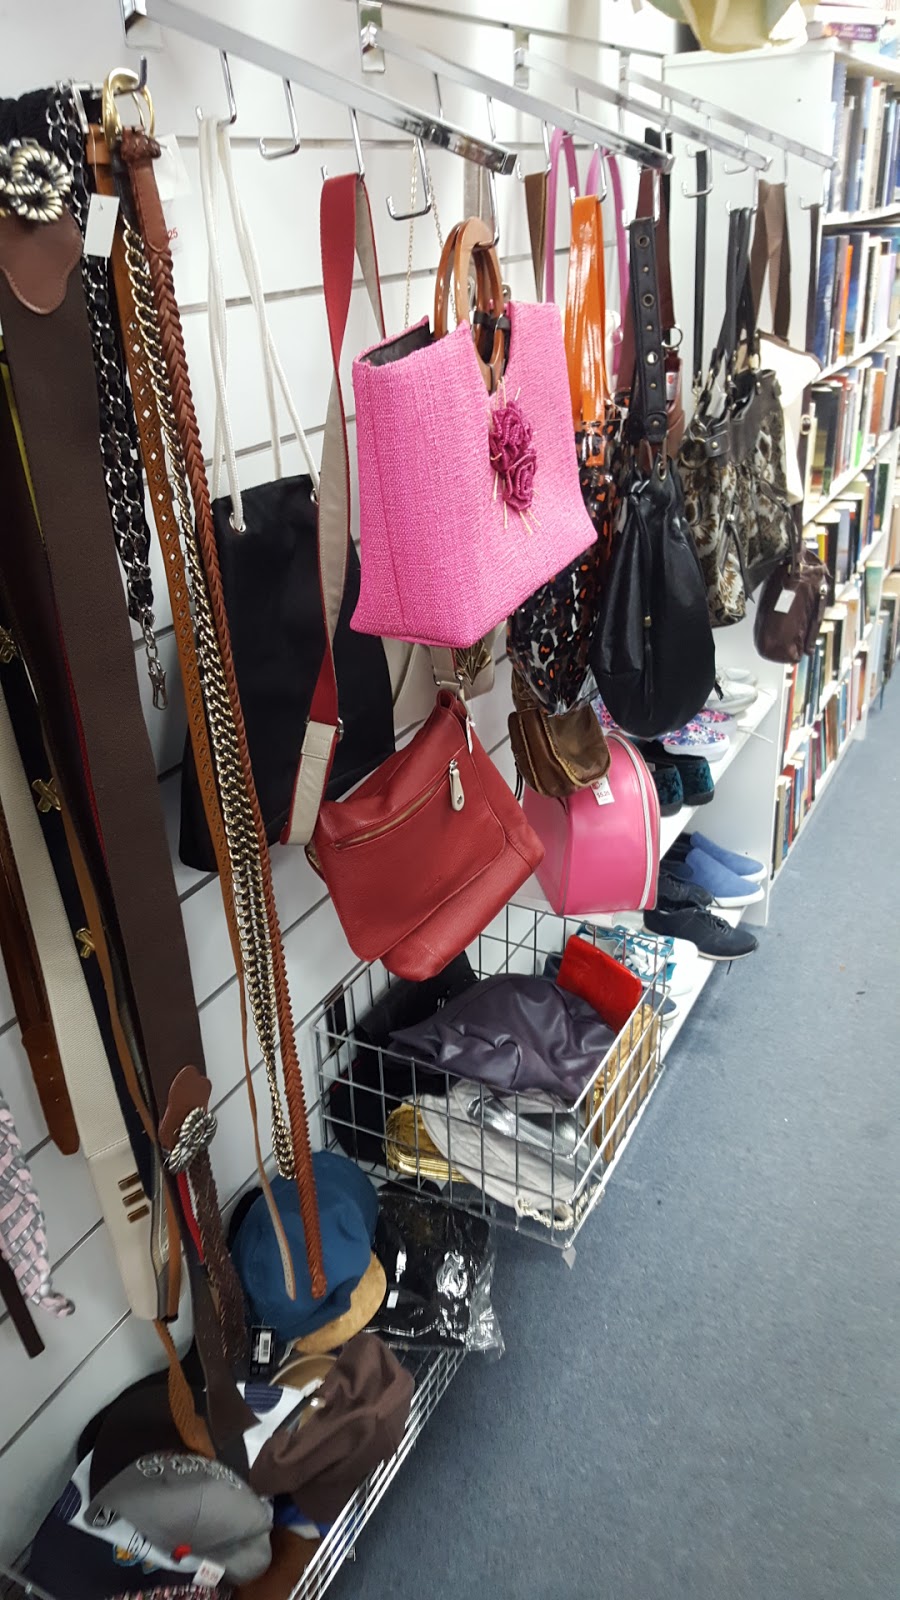 Salvos Stores Walkley Heights | Shop 1 Walkley Heights Shopping Centre, 1-11 R M Wiiliams Drive, Walkley Heights SA 5098, Australia | Phone: (08) 8162 5547